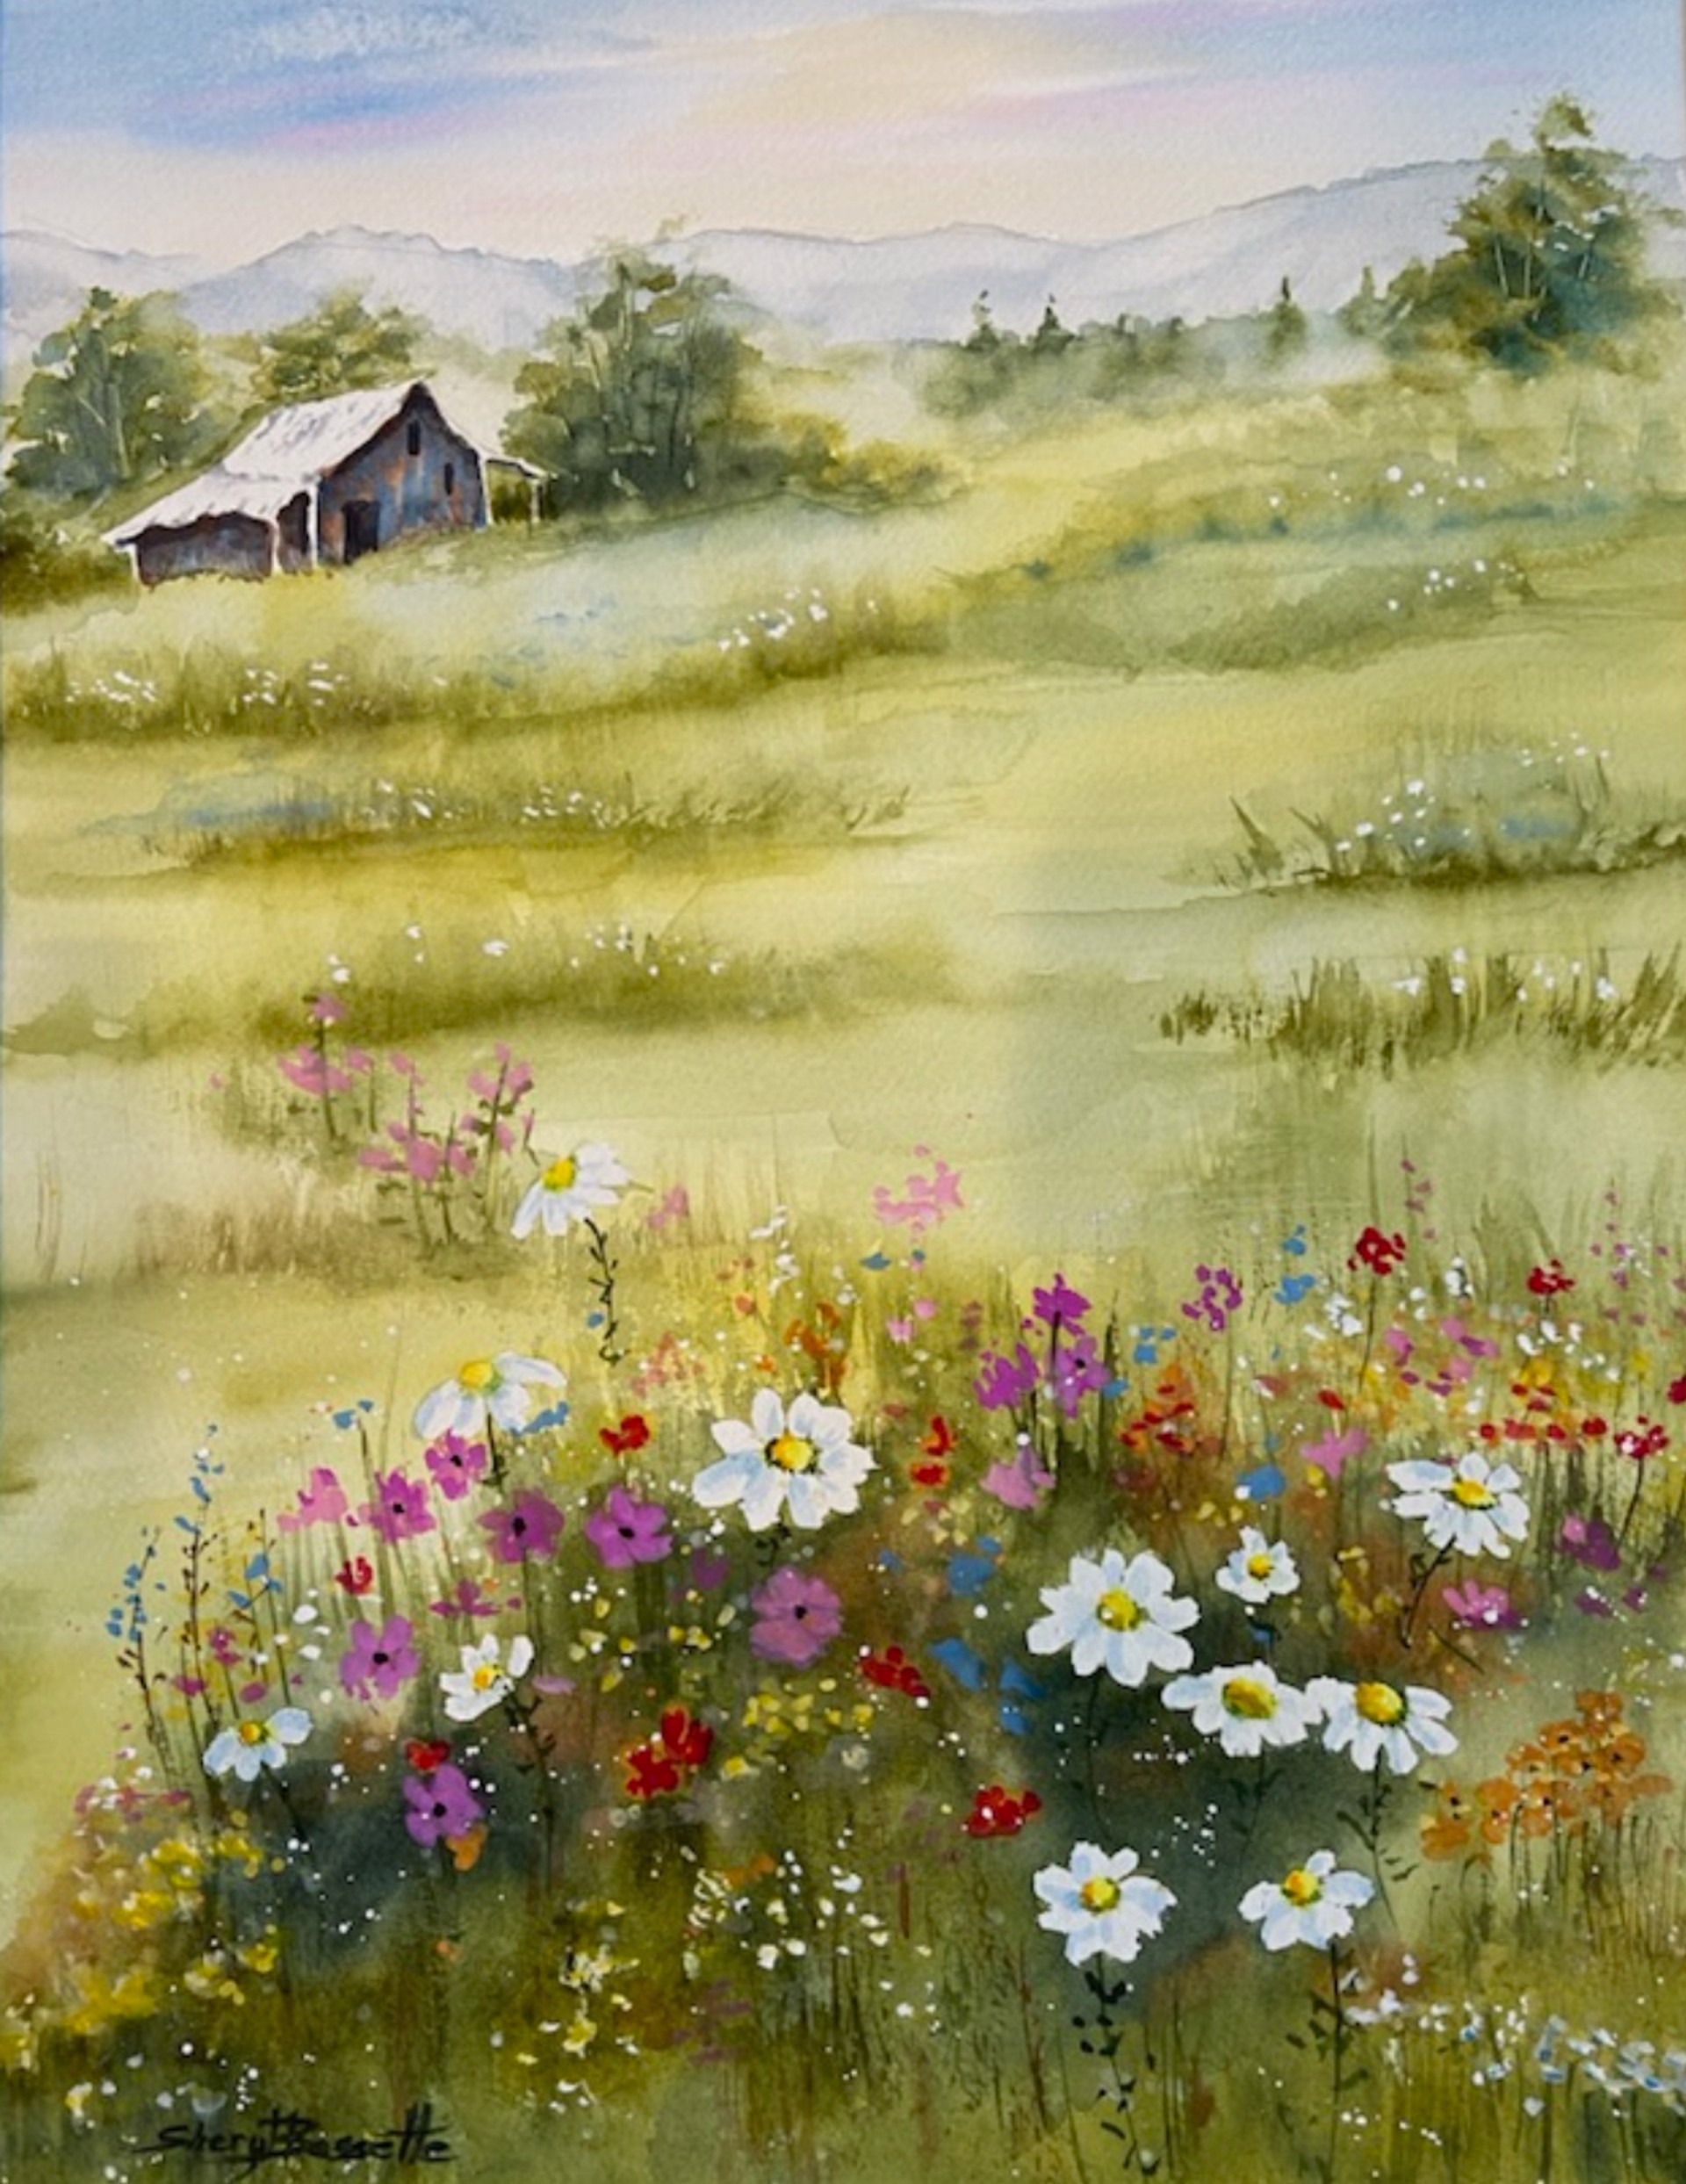 Wildflowers Forever by Sheryl Besette